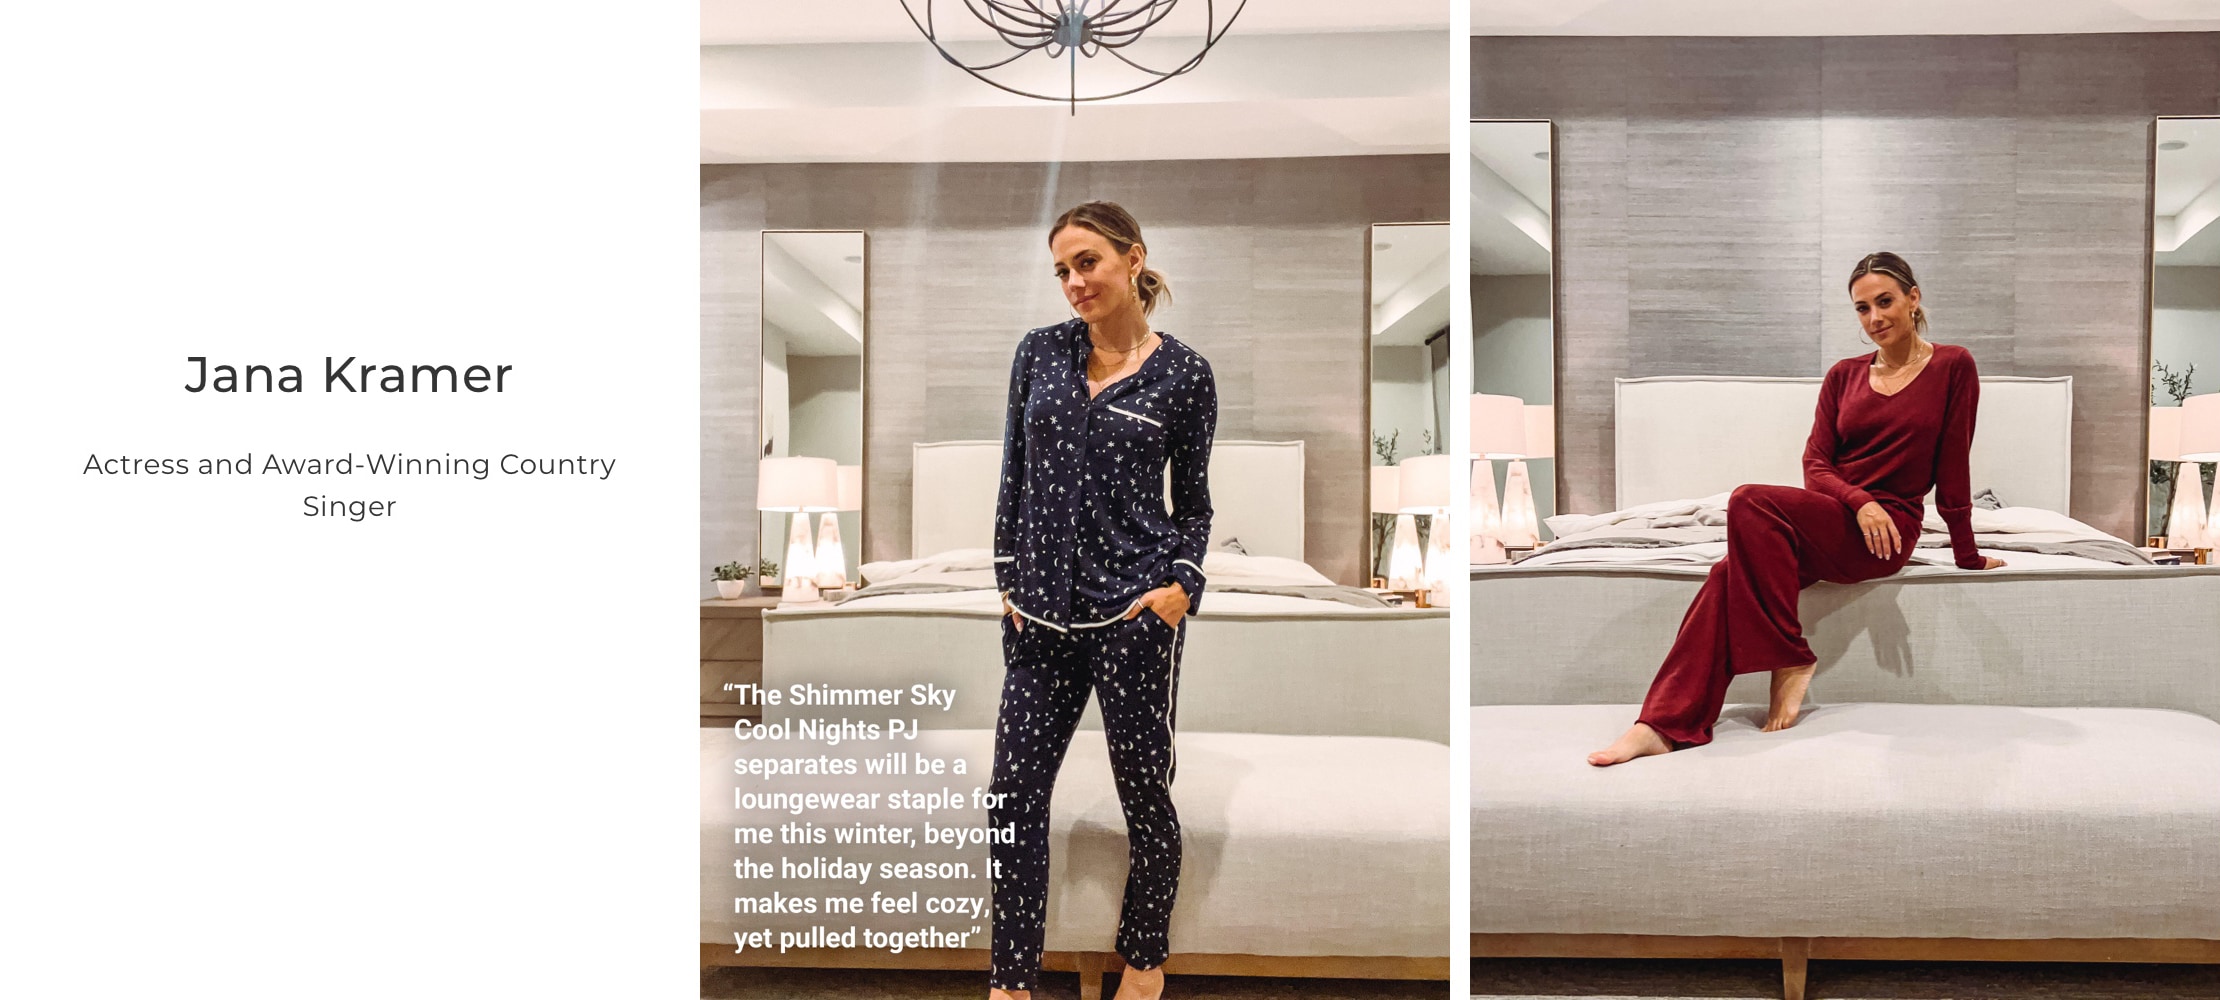 Jana Kramer. Actress and Award-Winning Country Singer. The Shimmer Sky Cool Nights PJ Separates will be a loungewear staple for me this winter, beyond the holiday season. It makes me feel cozy, yet pulled together.